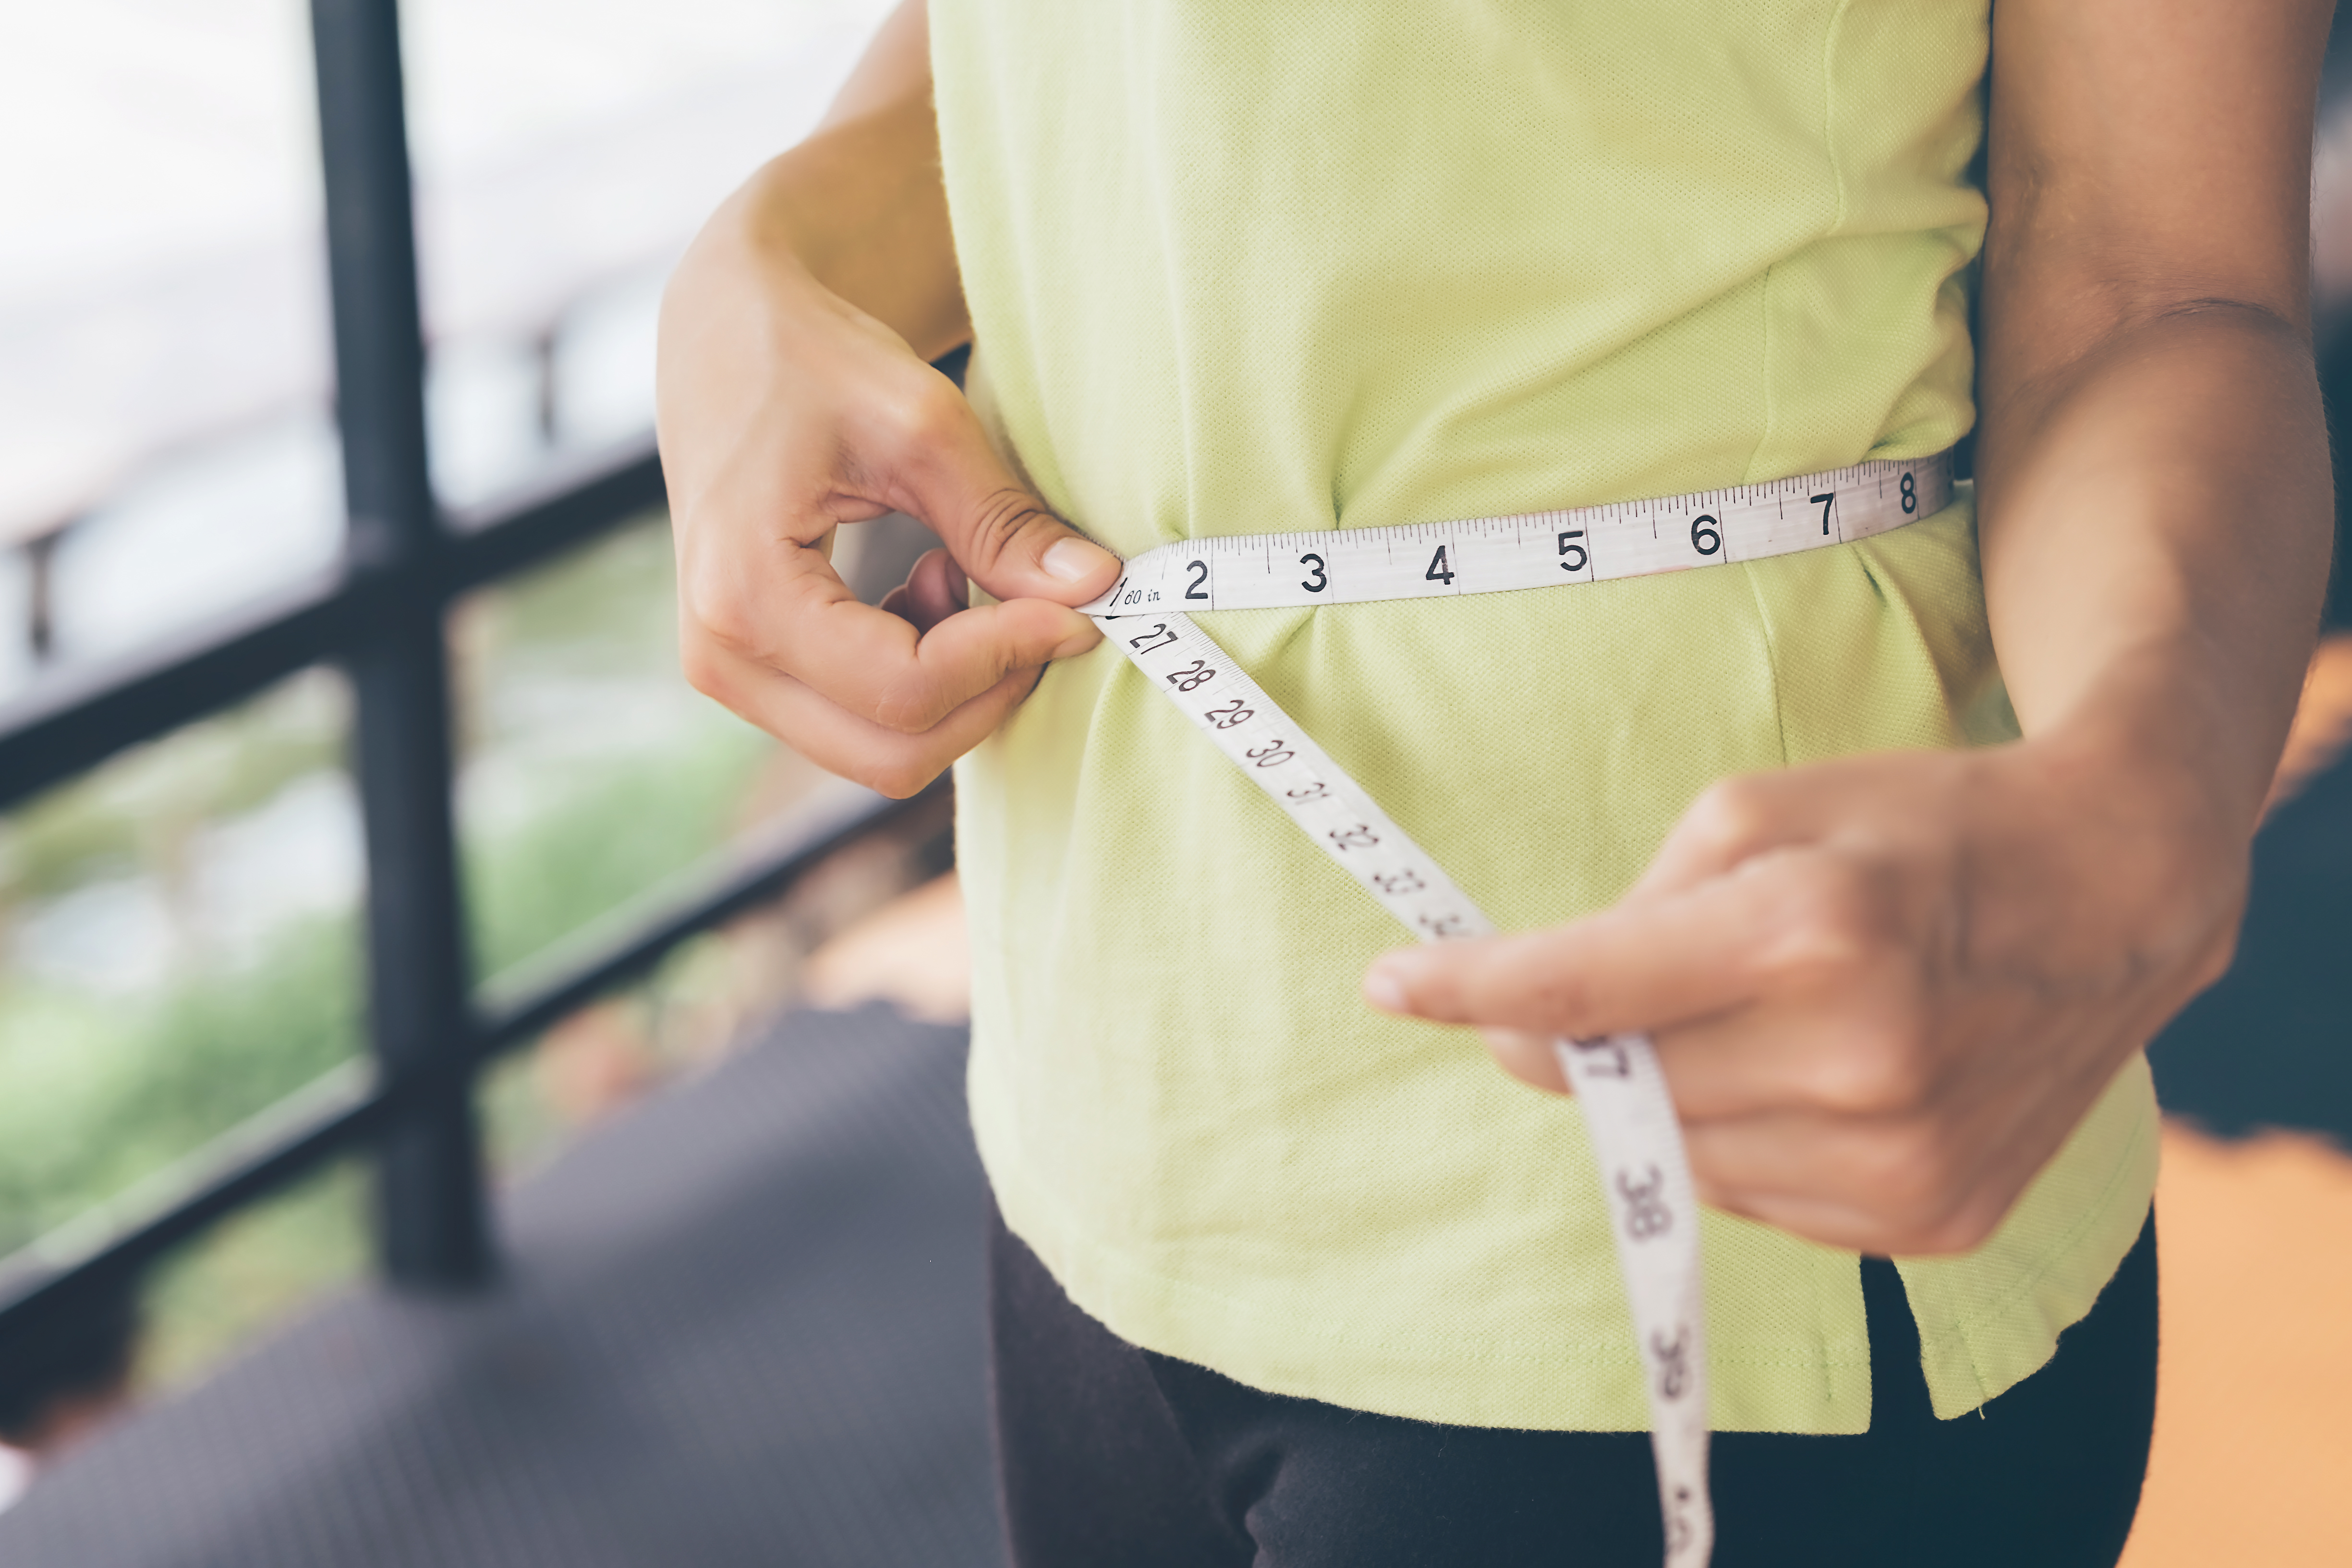 Is it possible to measure your body fat with a measuring tape? - Quora